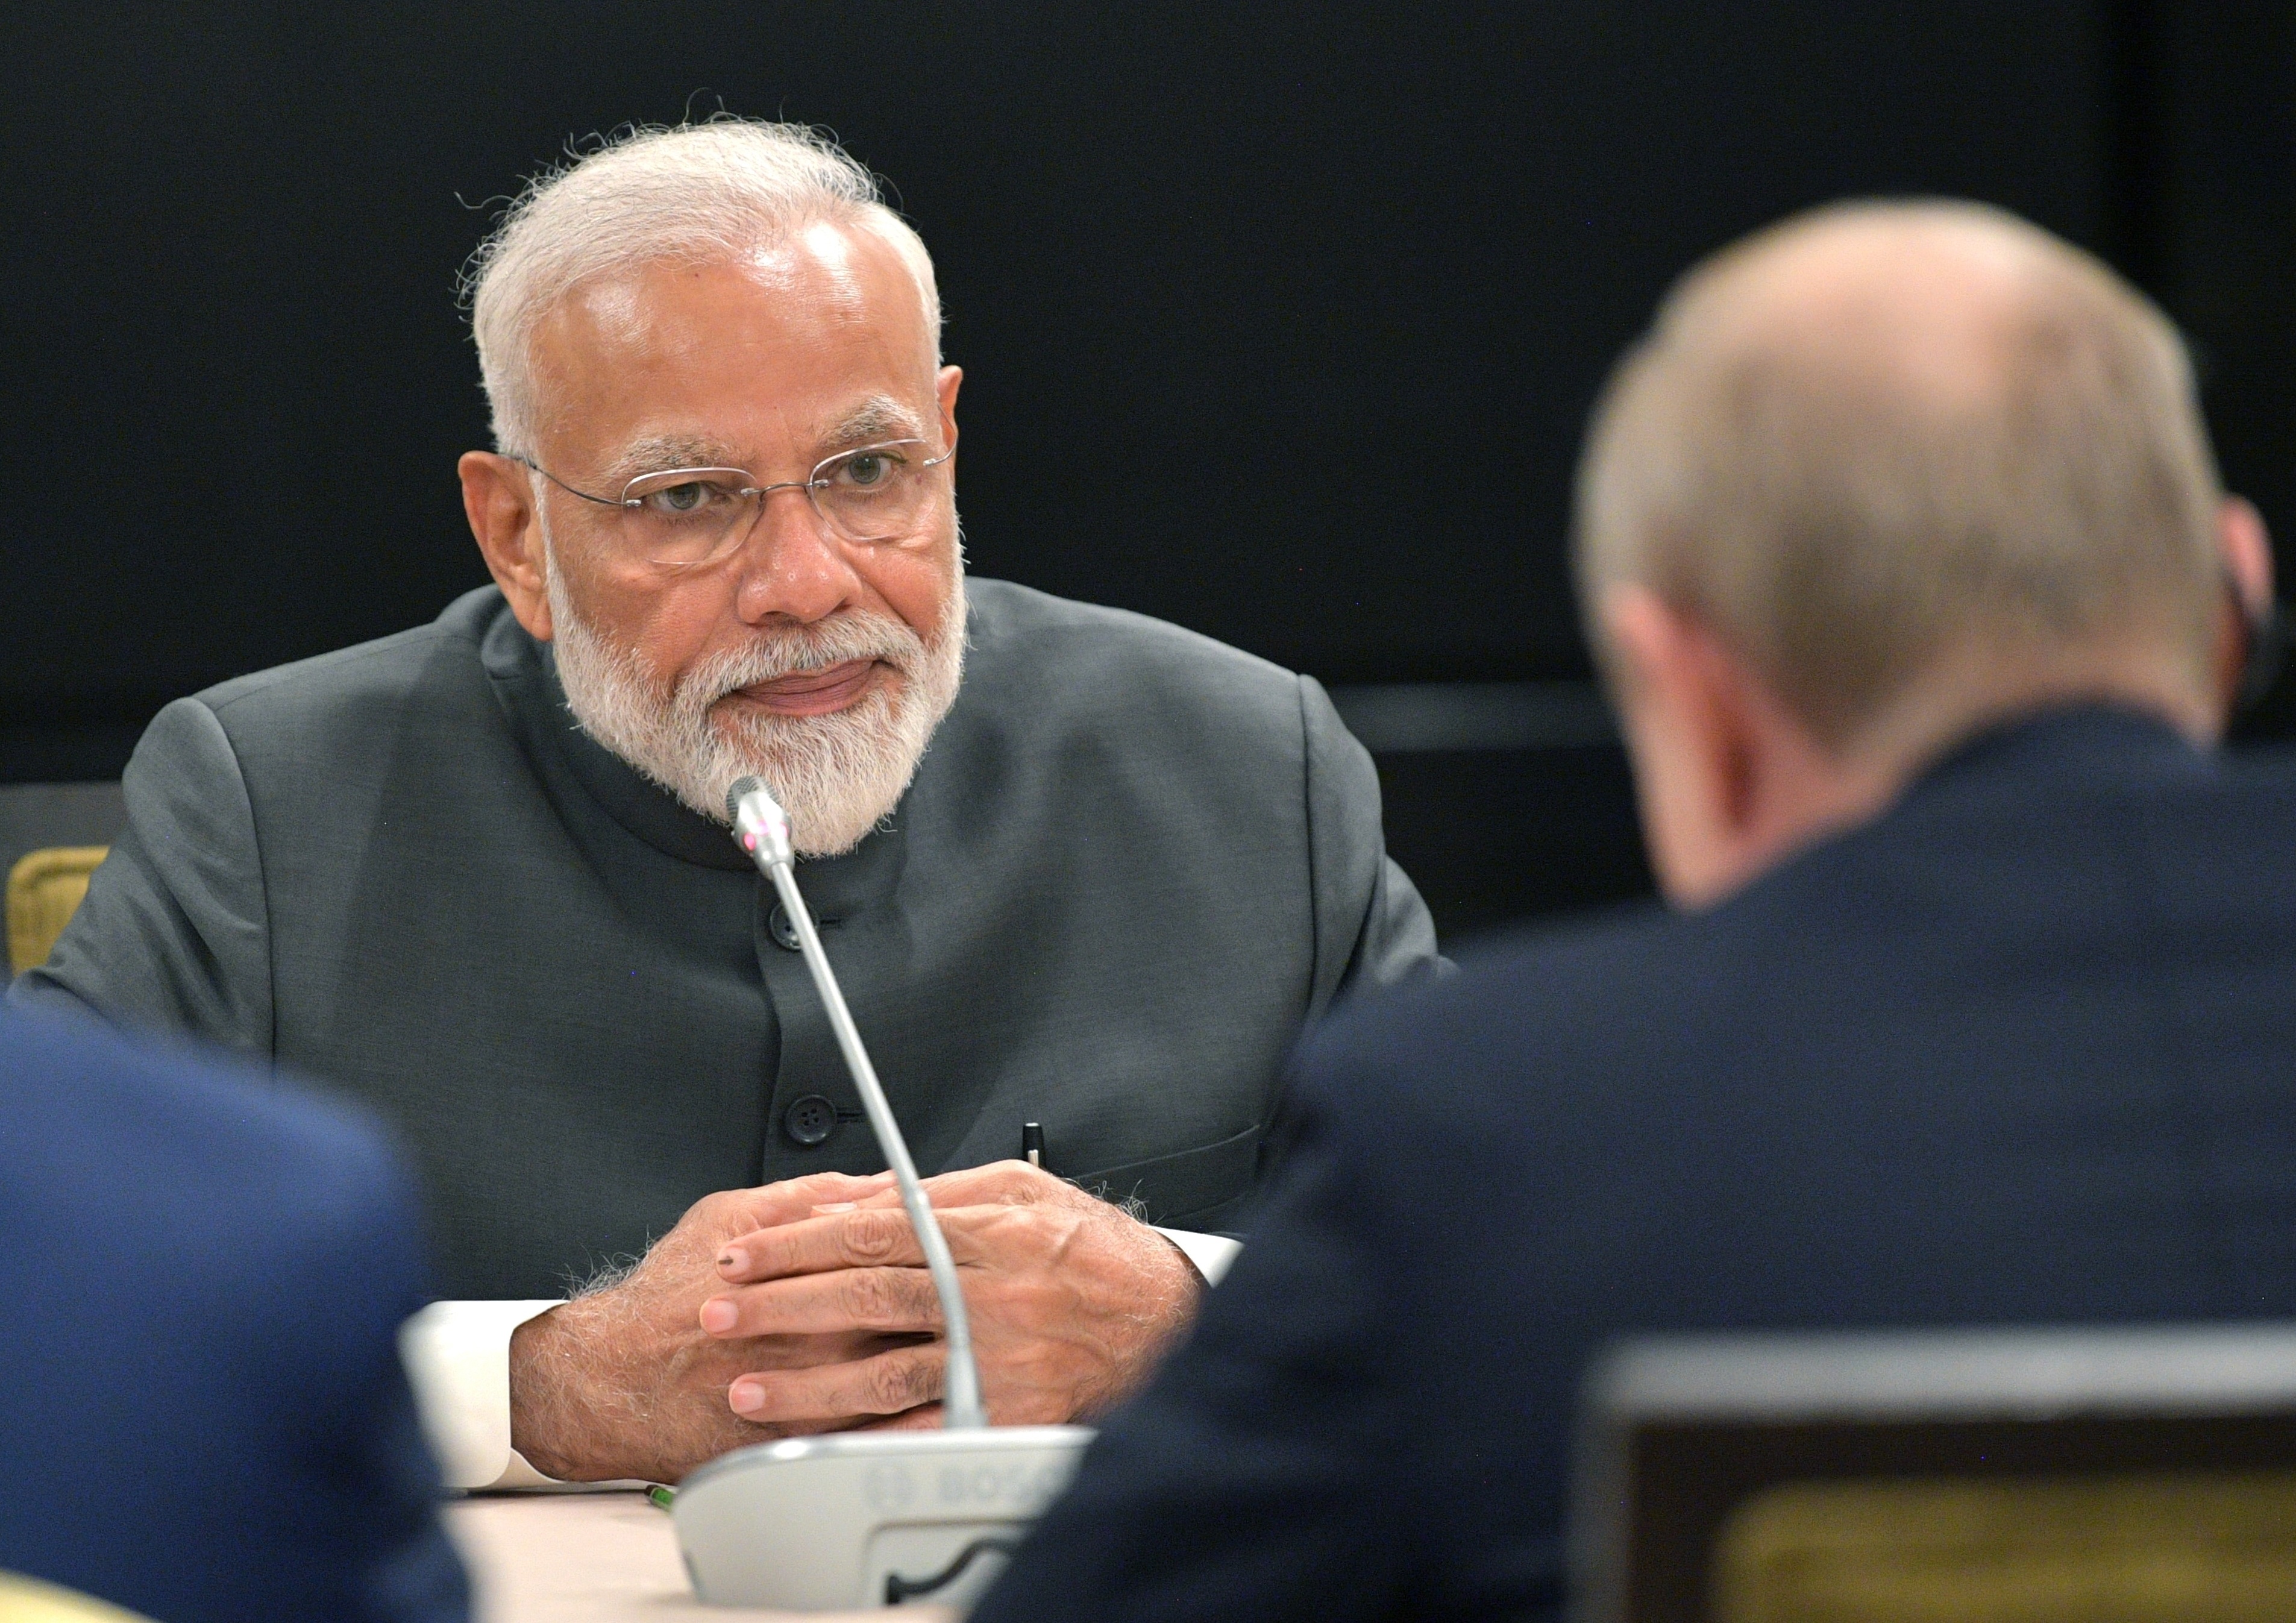 Narendra Modi listens to Russian President Vladimir Putin (back to a camera) during their talks on a sidelines of the Shanghai Cooperation Organization Summit in Bishkek, Kyrgyzstan, on June 13.